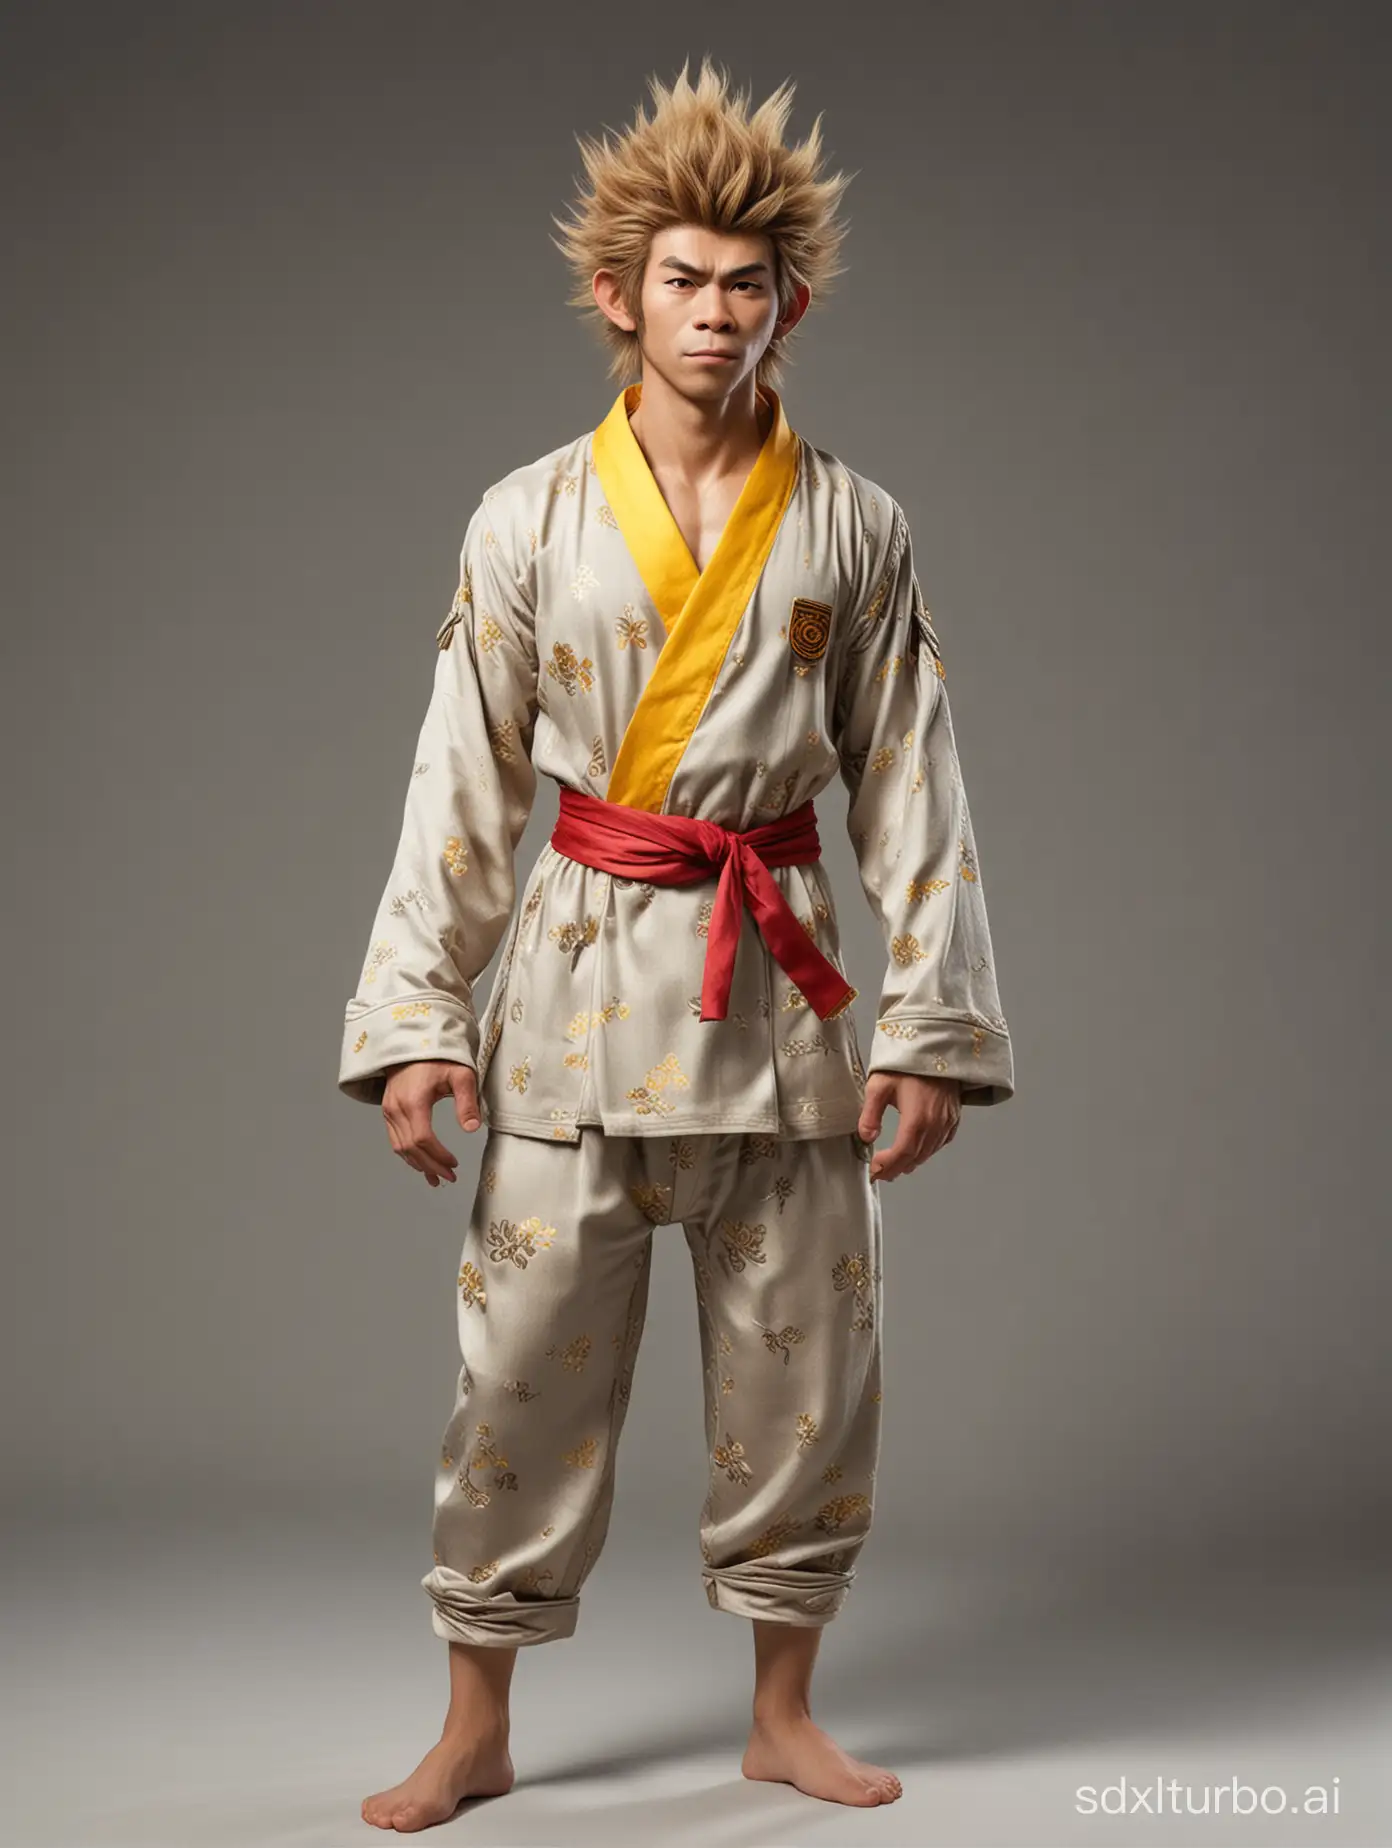 Sun Wukong is wearing pajamas, standing lazily in military posture, wearing slippers, with both arms vertically attached to the body, hands empty, appearing rather lazy, with a tuft of hair standing on top of his head;
For a modern version of Sun Wukong, a bit of contemporary vibe can be added; youthful and energetic